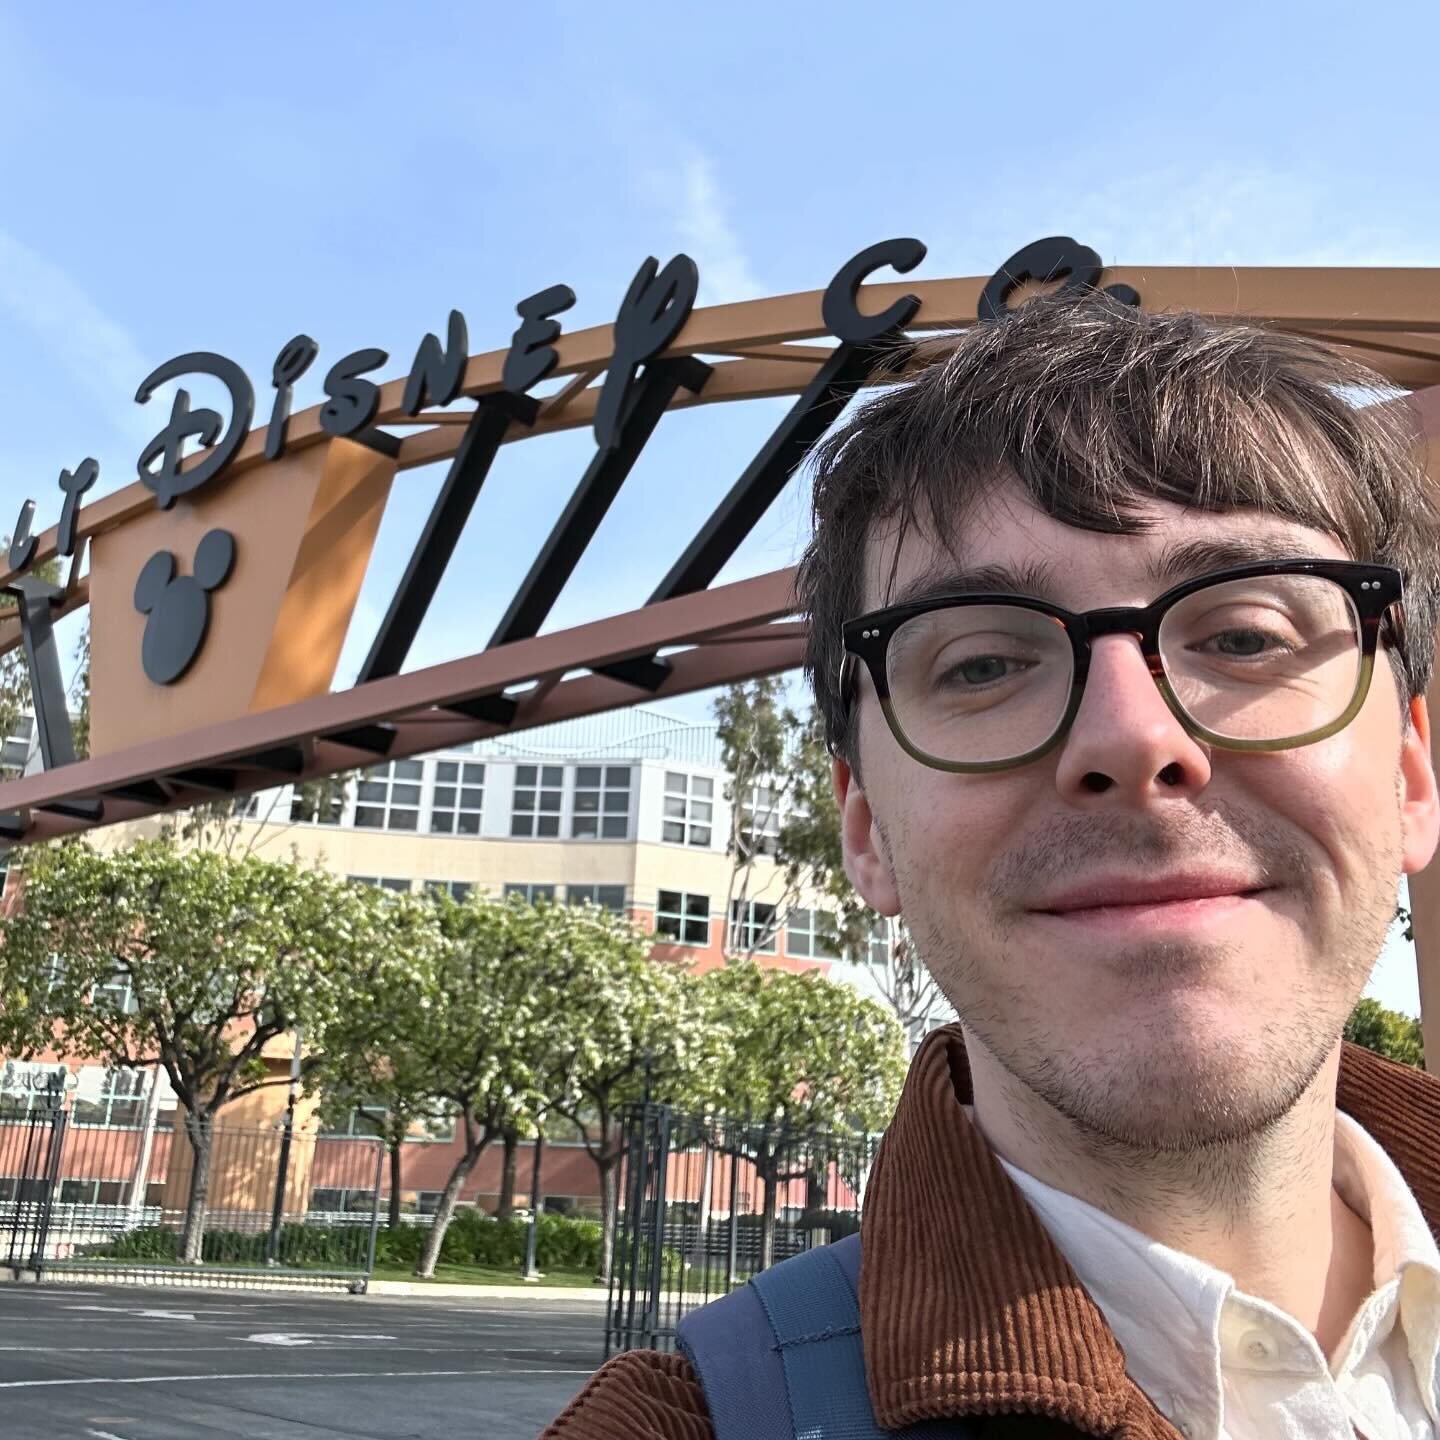 Quite possibly the maddest year. A lot happened, very fast. Here&rsquo;s that in just selfies. 2️⃣0️⃣2️⃣3️⃣

🐭 Went to LA to for the first time with work to visit the Disney mothership. And ticked Disneyland off the bucket list spending 16 hours in 